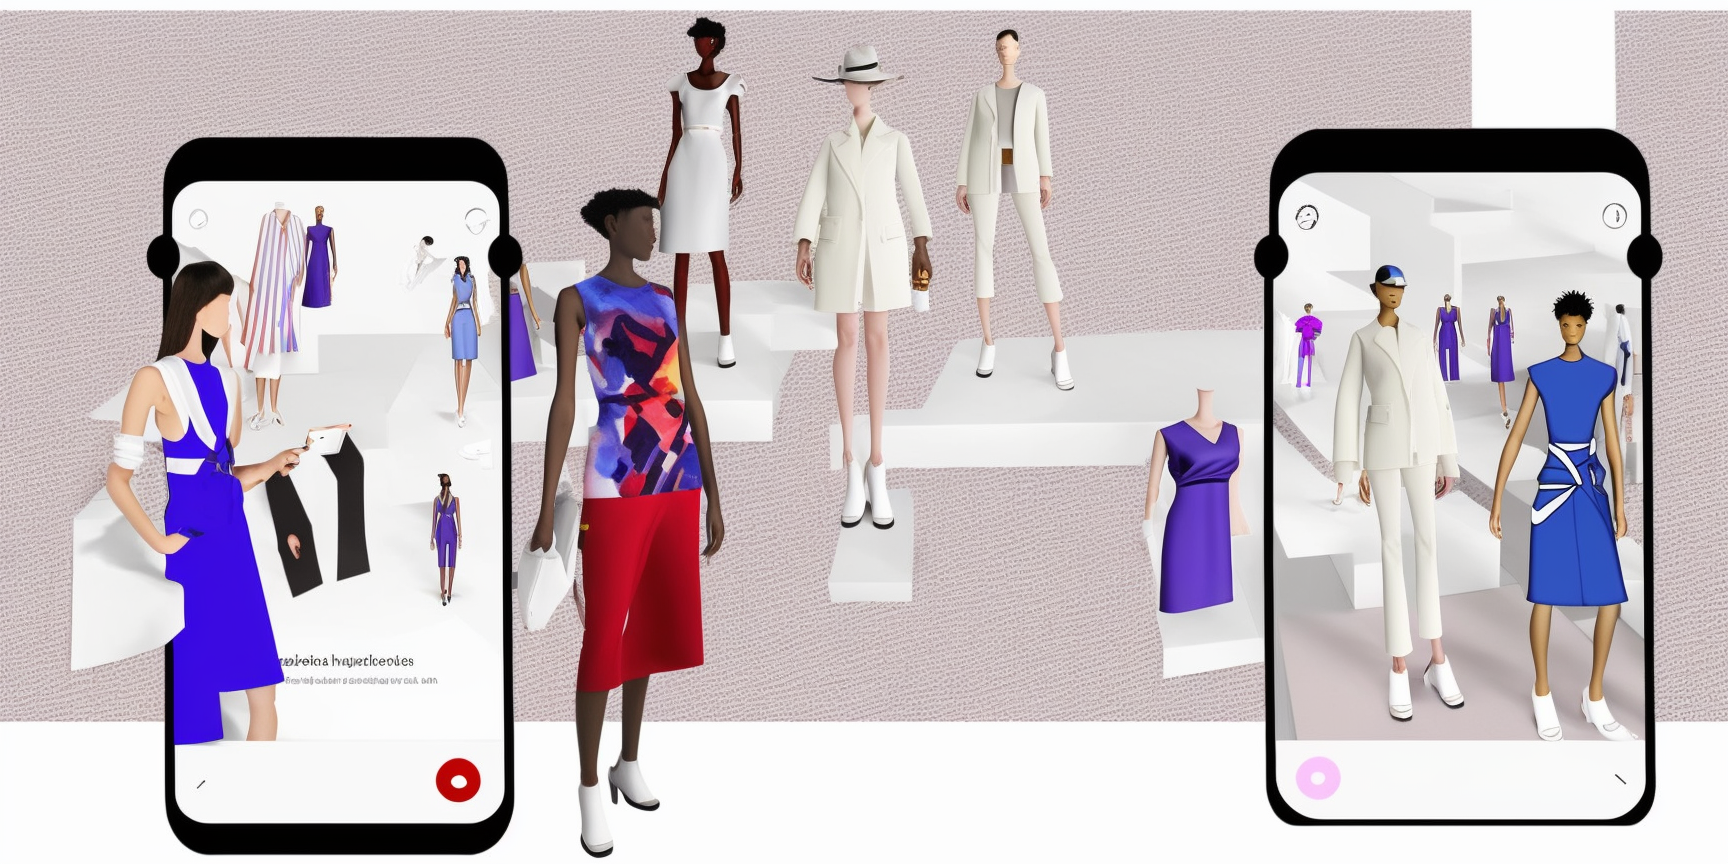 Enhancing Online Shopping for Fashion industry with Omnichannel Experience using AR and Browser-based 3D Experience